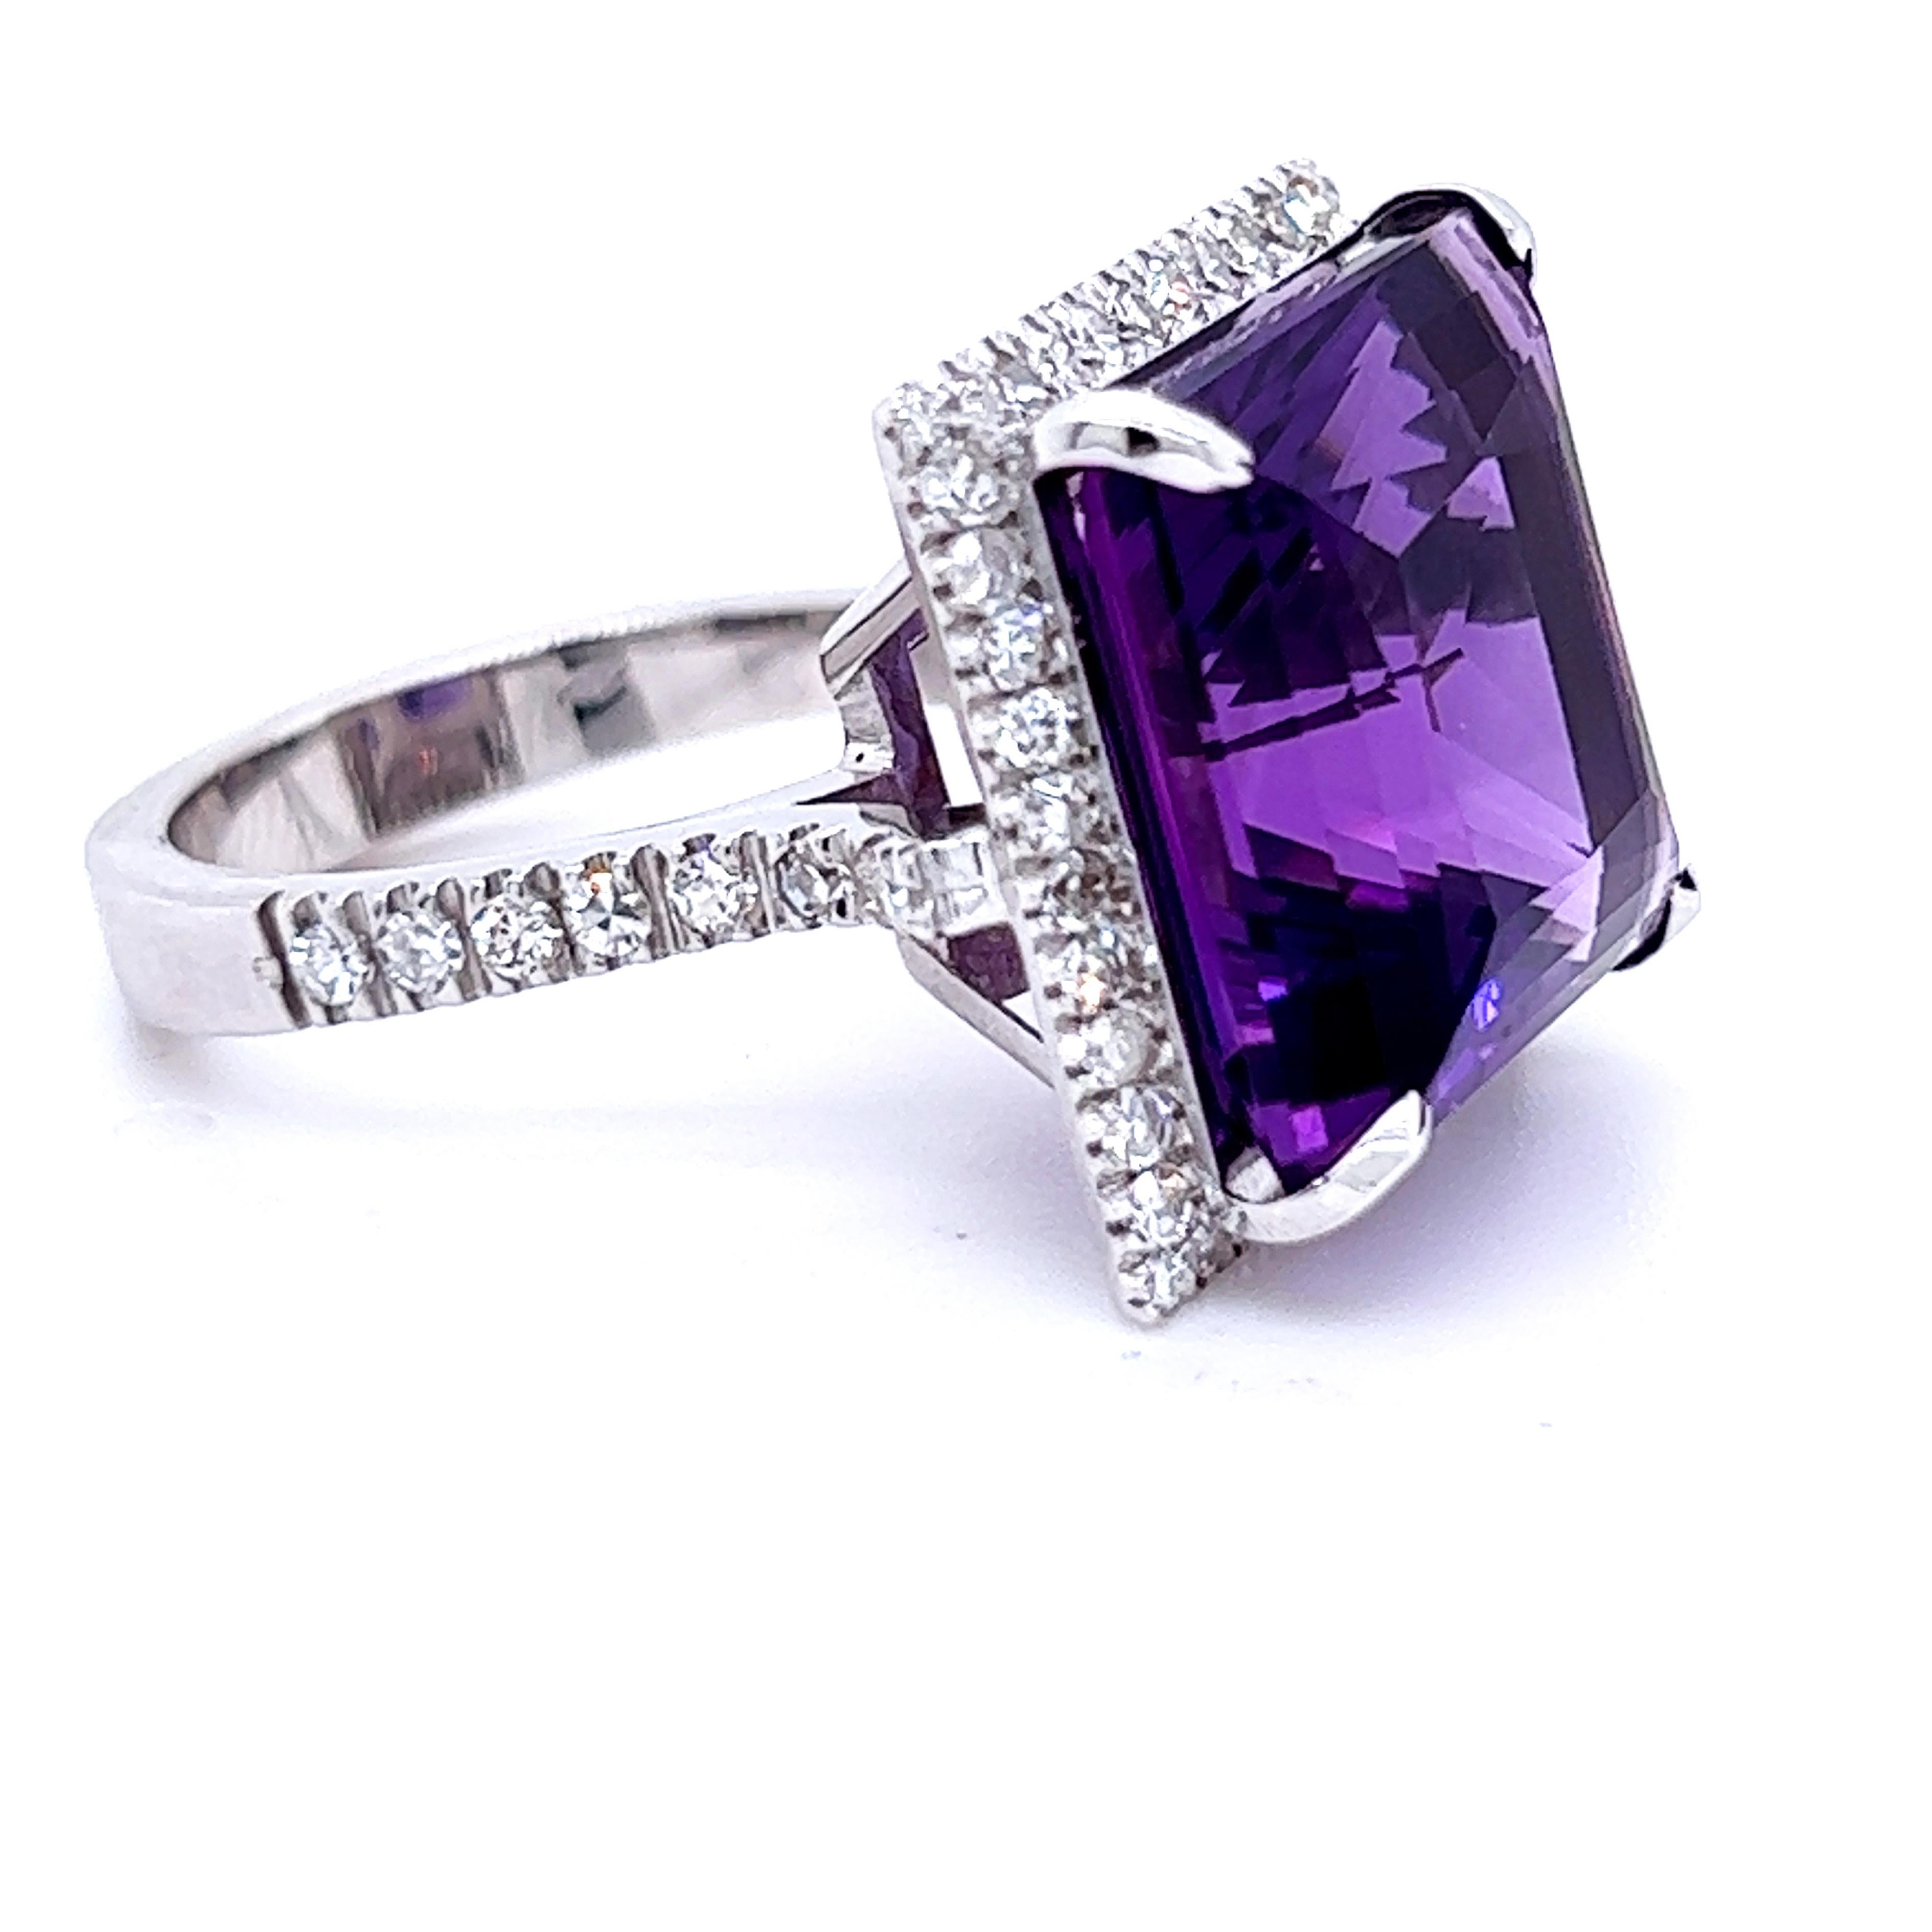 Sumptuous and One-of-a-kind Cocktail Ring featuring a 15.51 Carat Princess Cut Natural Velvety Purple Amethyst in an 1.09Carat, 66 brilliant cut, top quality White Diamond 18 Carat White Gold Setting.
In our fitted Dark Brown Suede Leather